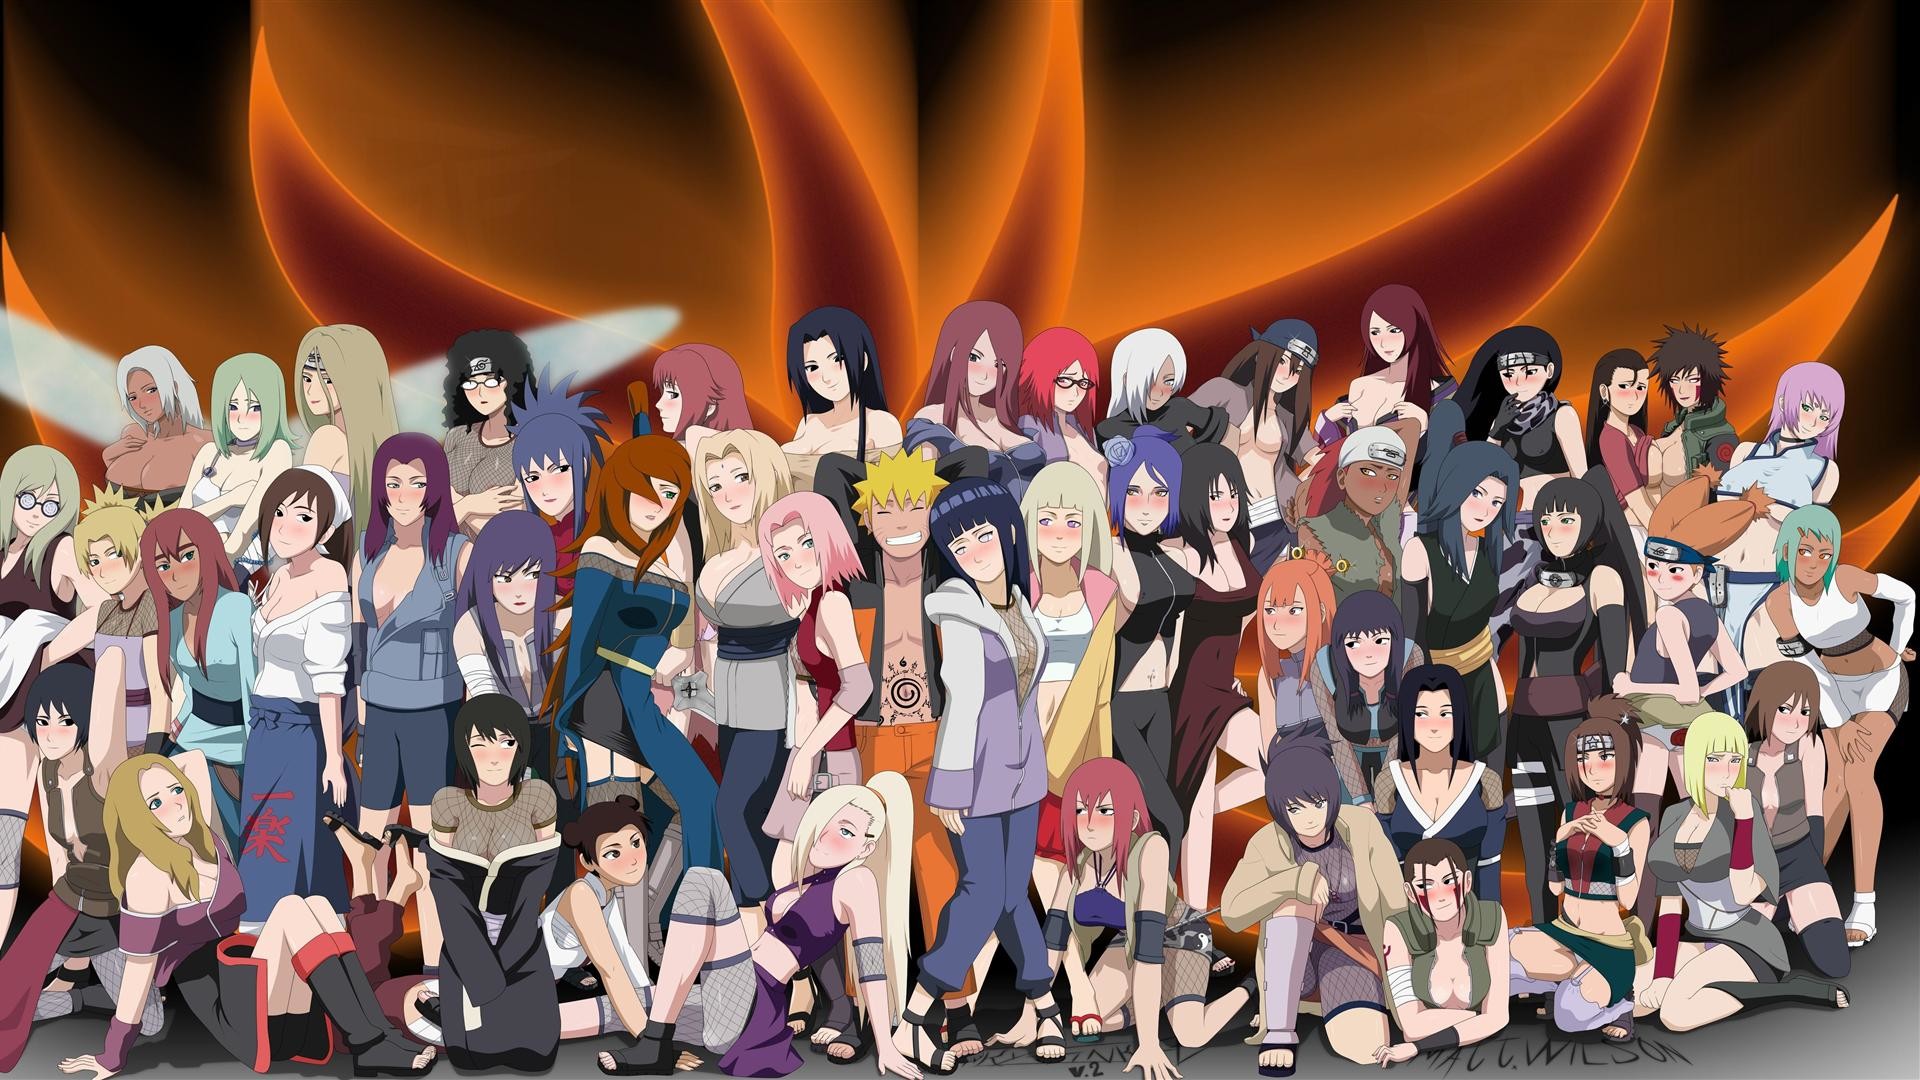 1920x1080 ... Naruto Group Wallpapers - Wallpaper Gallery Â· Wallpapers of Naruto  Characters ...